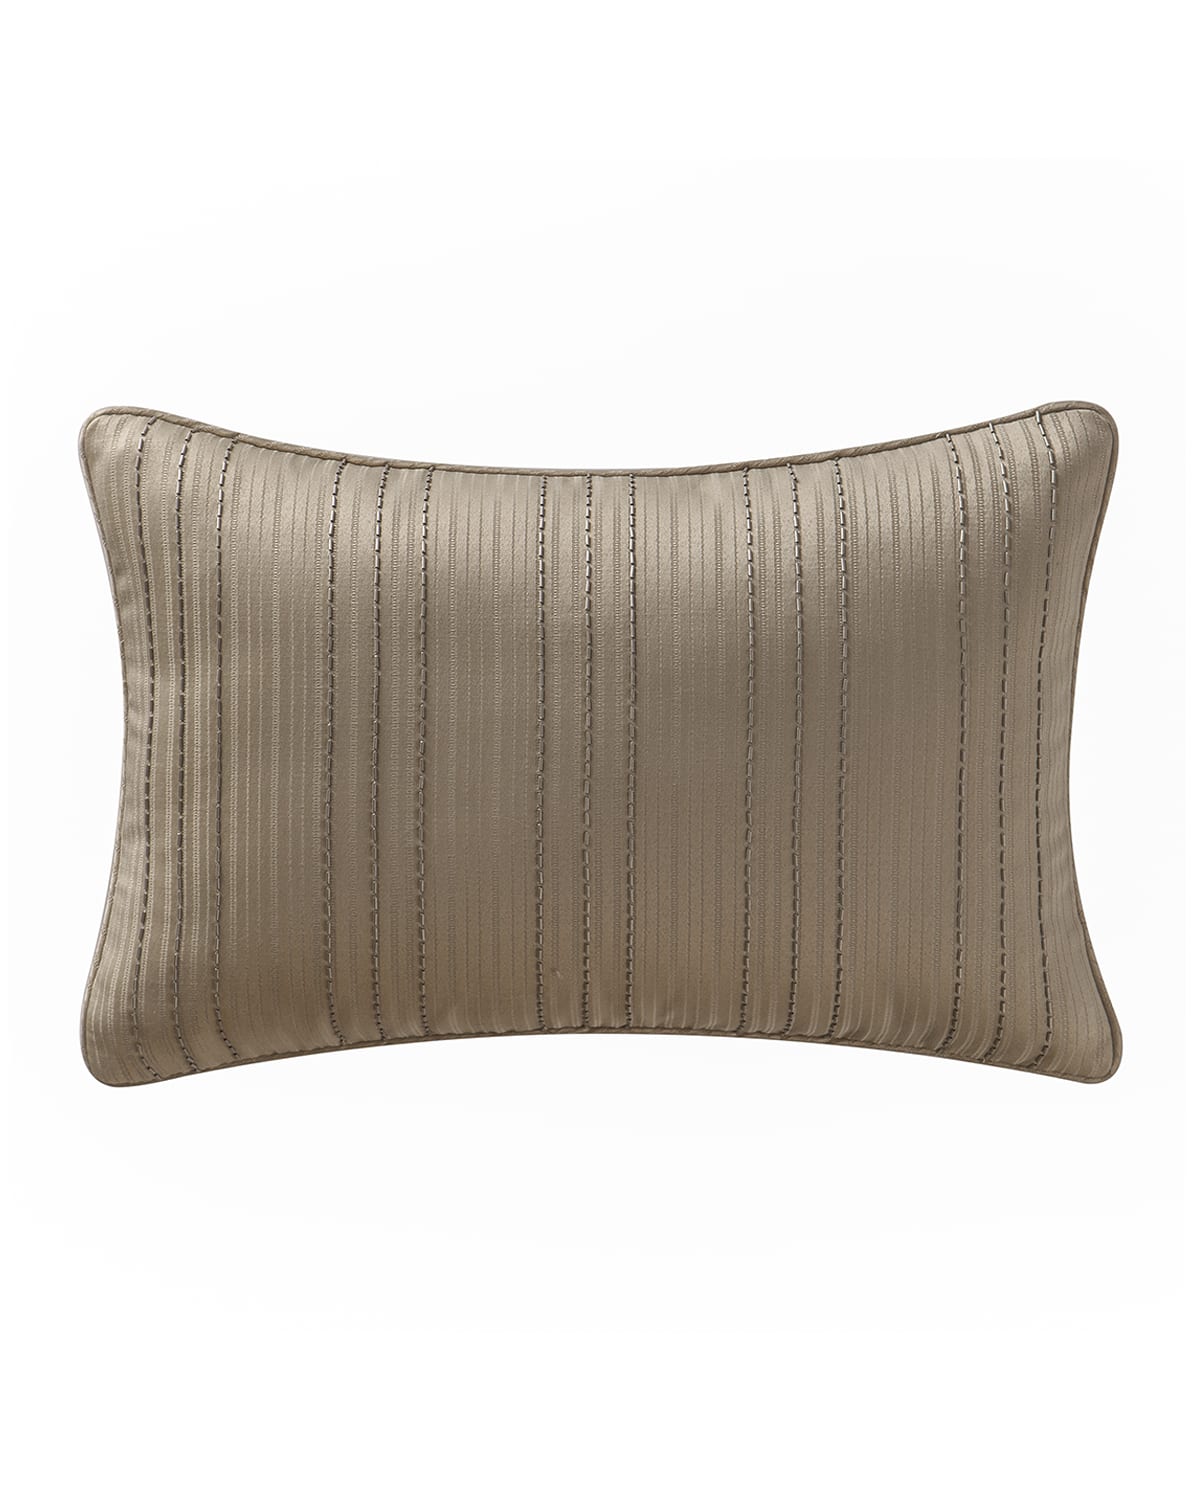 Image Waterford Chantelle Beaded Stripe Pillow, 12" x 18"